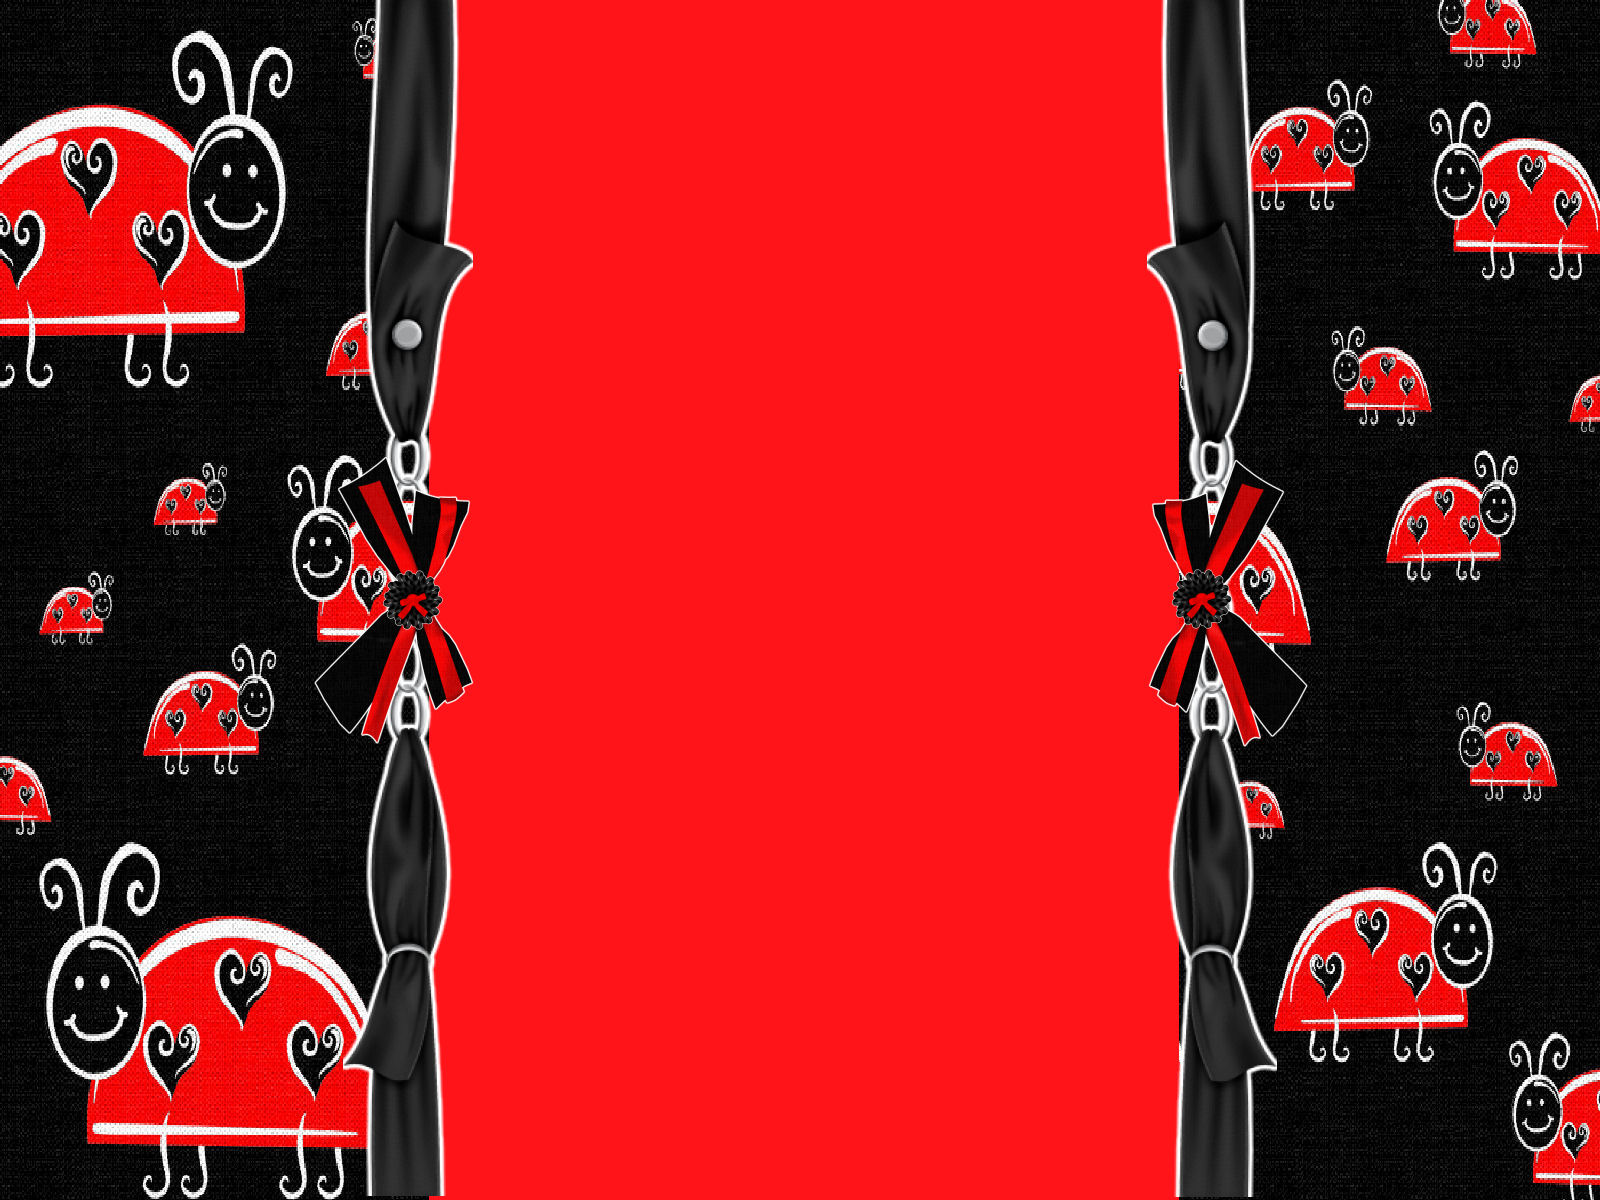 Ladybug Ger Layout Template Background Jelly S